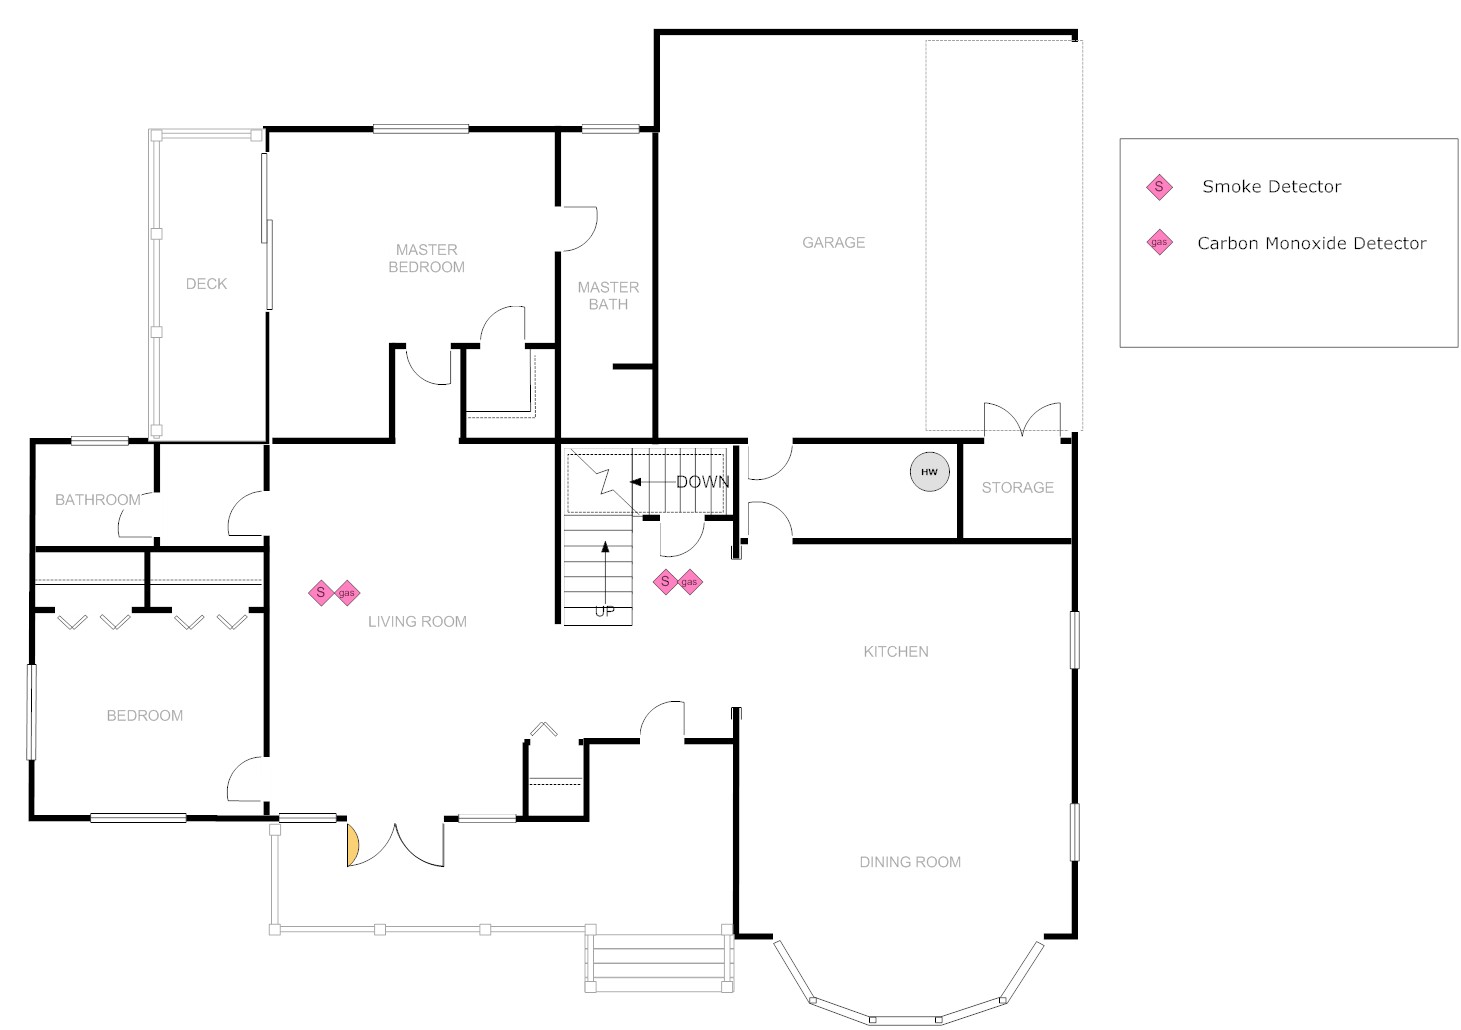 Home floor plan with smoke detection mapped out per 1975 fire code. 